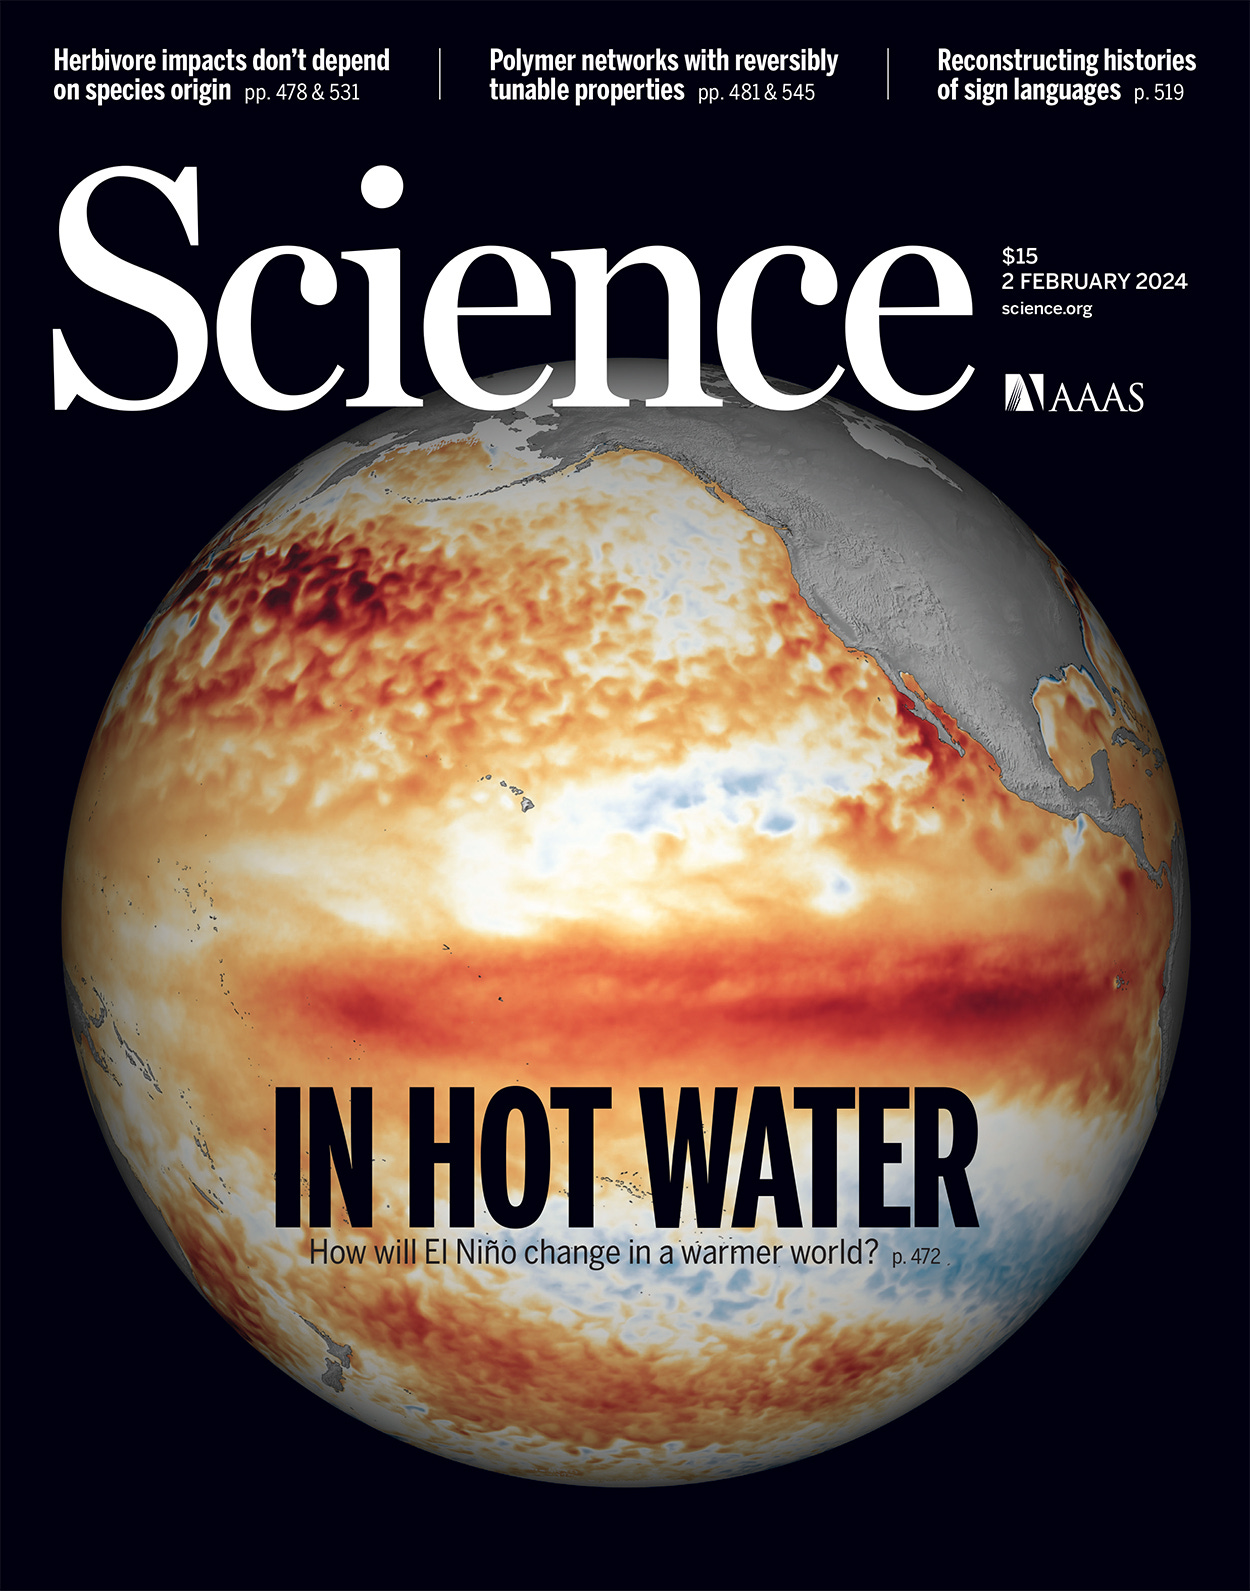 photo of the cover of the latest issue of Science magazine, dated February 2, 2024.